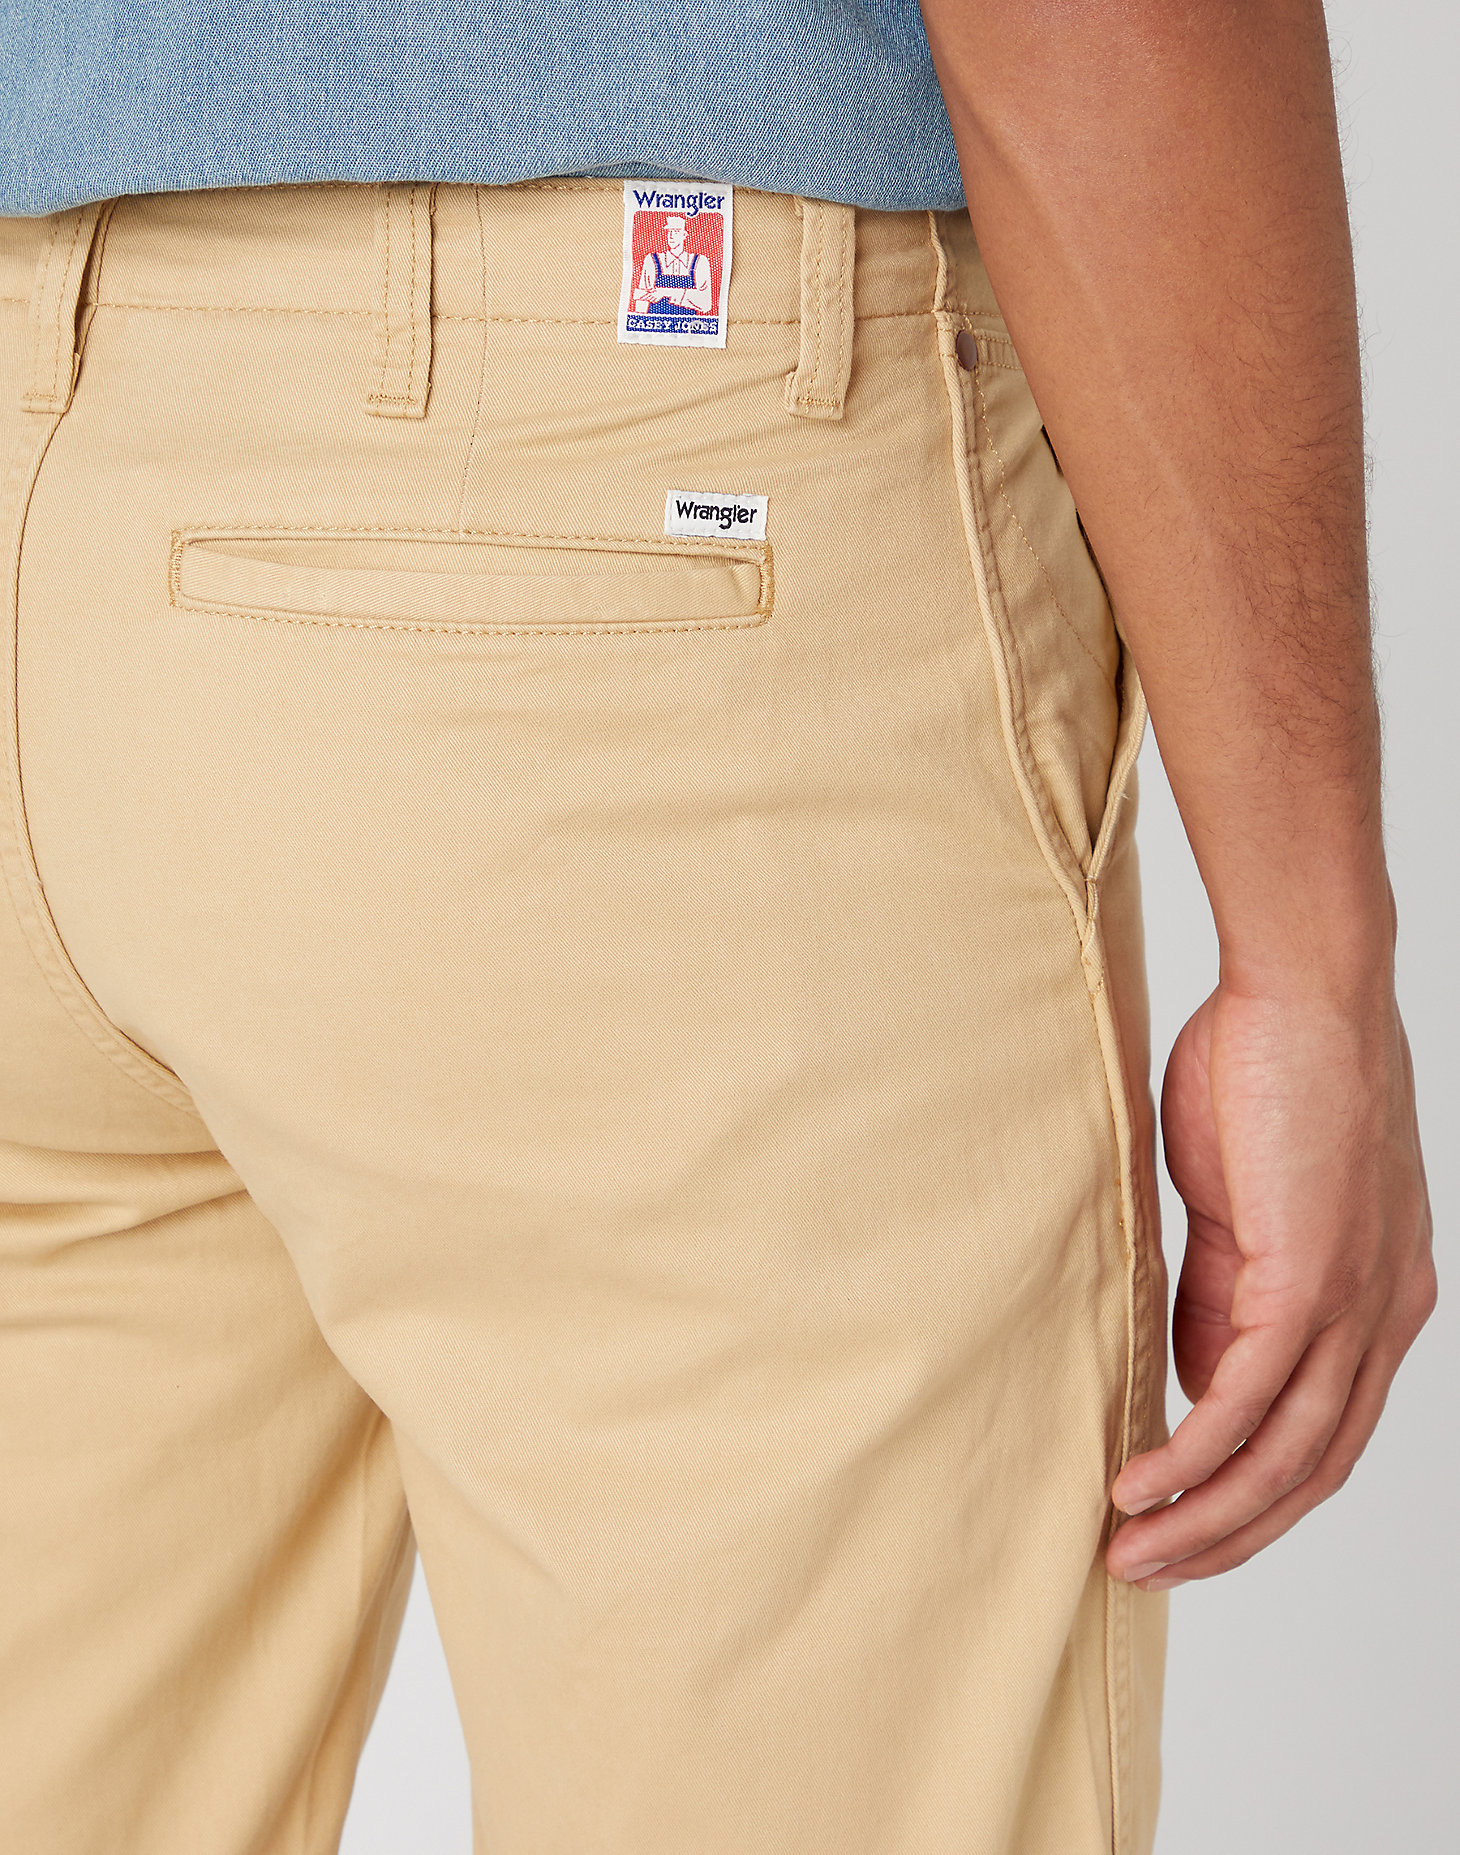 Casey Chino Shorts in Taos Taupe alternative view 3